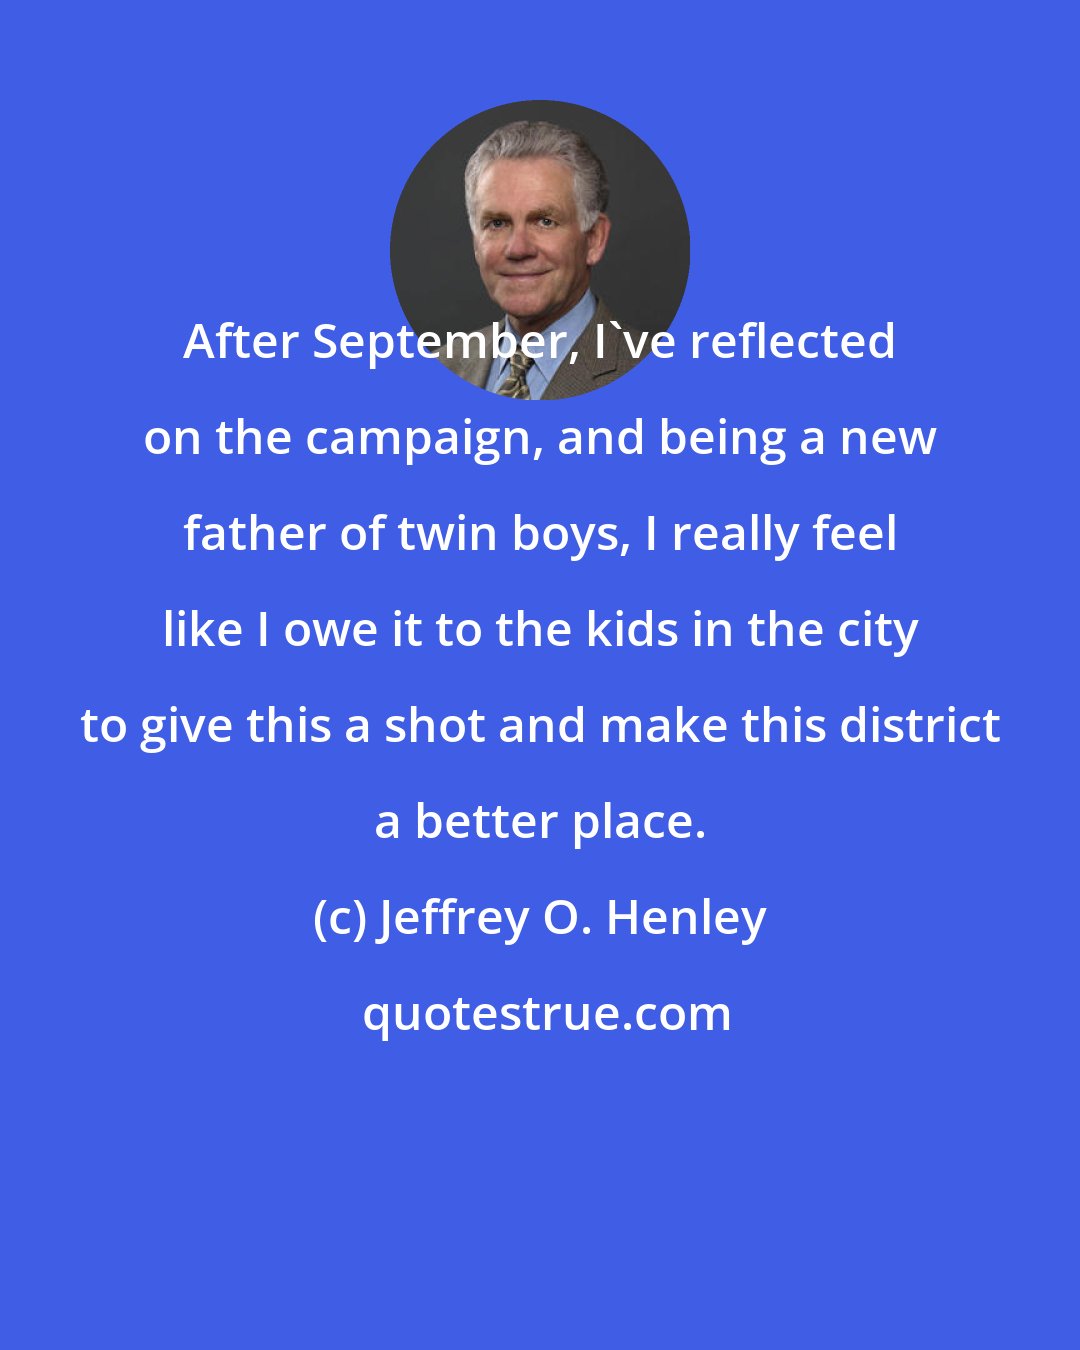 Jeffrey O. Henley: After September, I've reflected on the campaign, and being a new father of twin boys, I really feel like I owe it to the kids in the city to give this a shot and make this district a better place.